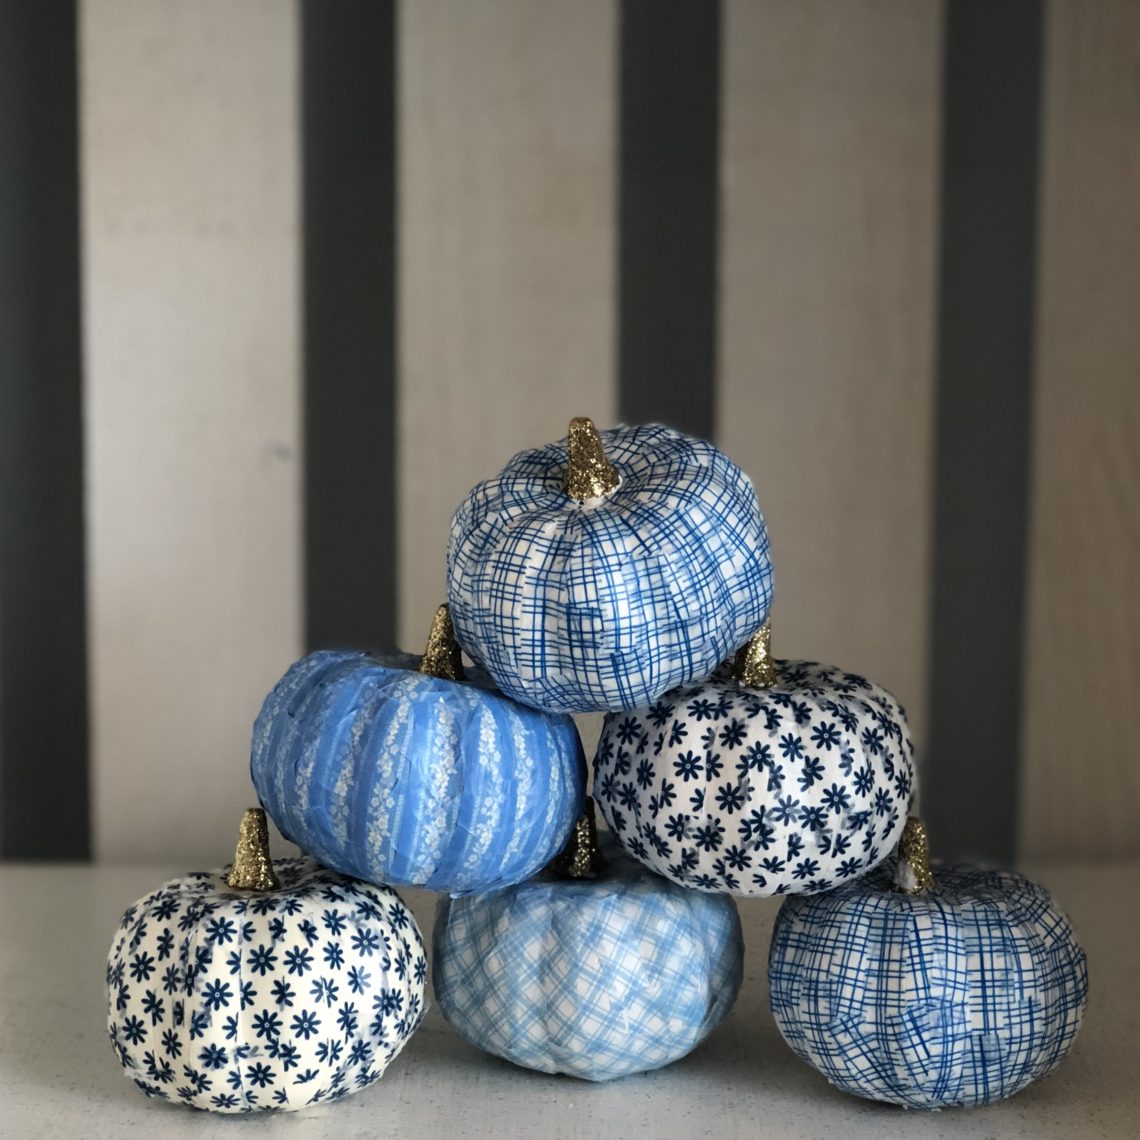 Blue and white DIY washi tape pumpkin decorations for Halloween or fall.